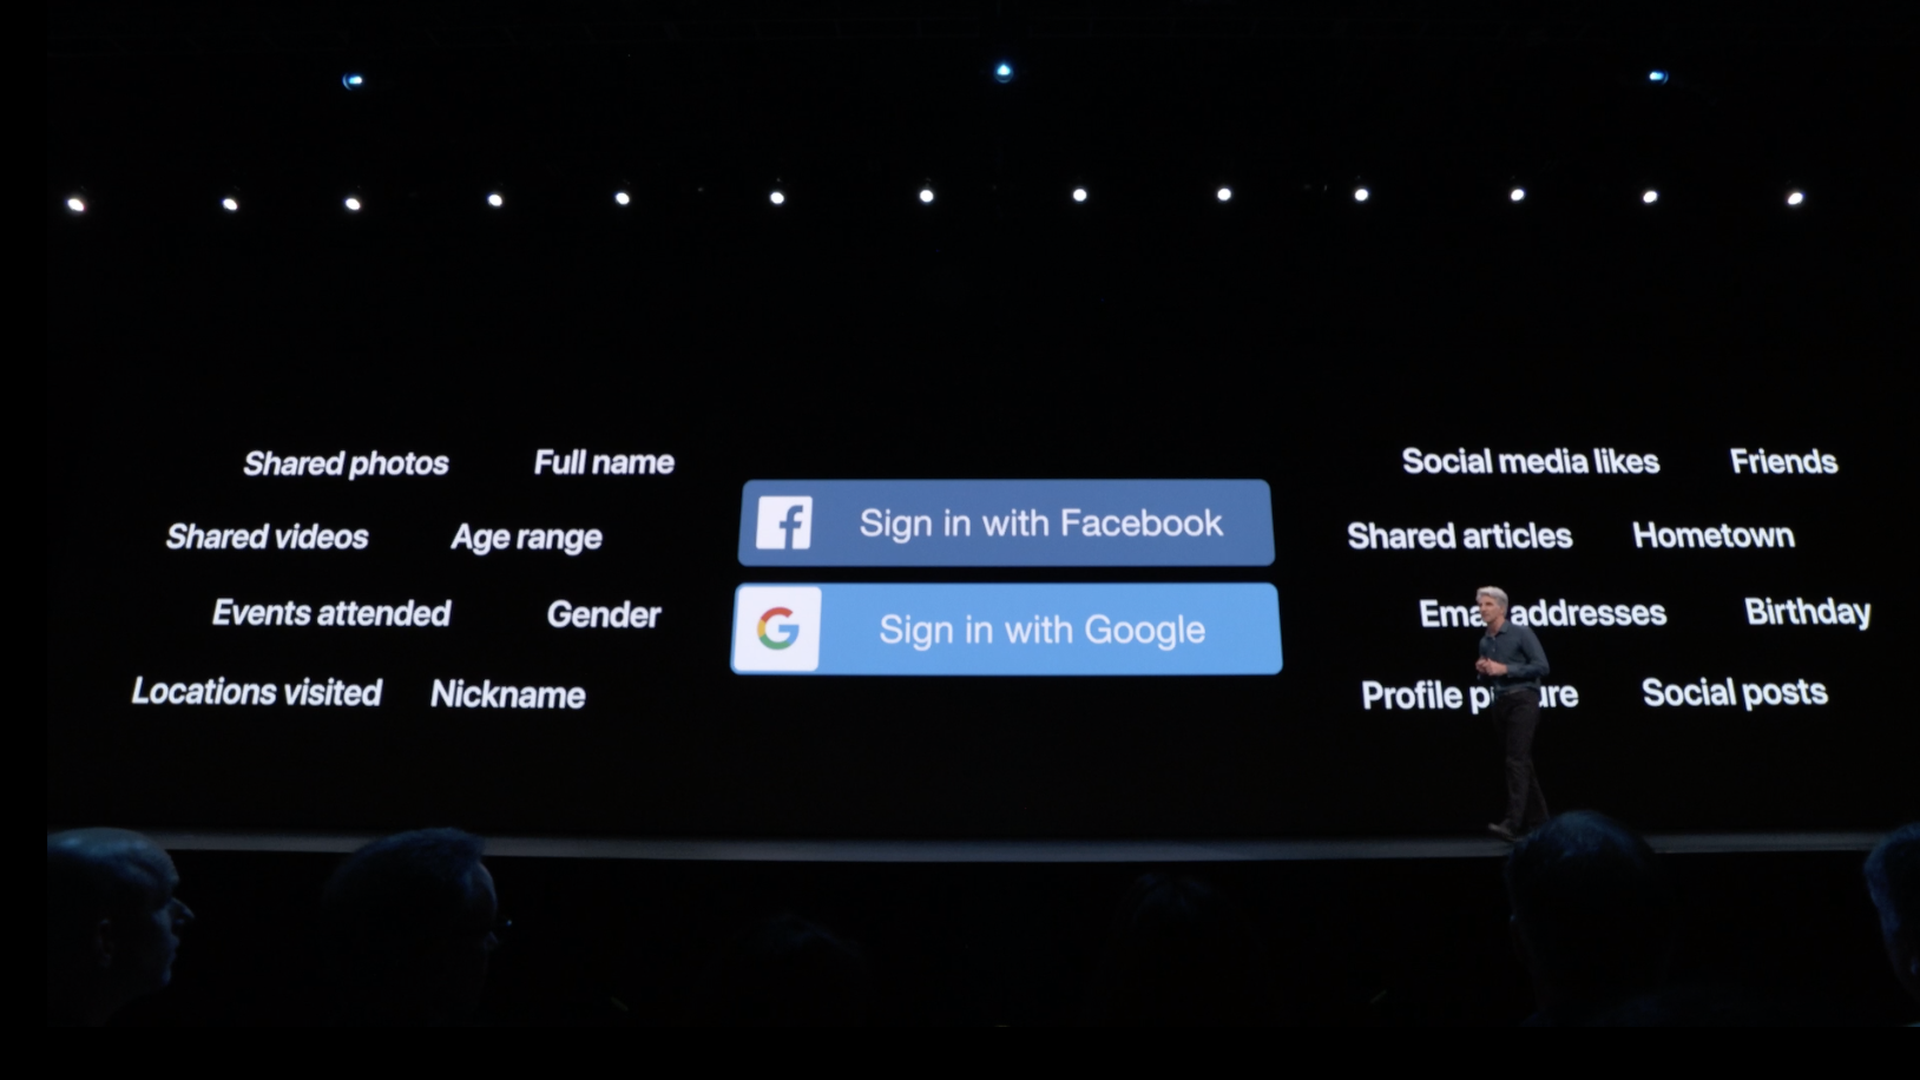 Apple iOS chief Craig Federighi outlining some of the drawbacks of Facebook and Google's authentication systems at WWDC 2019